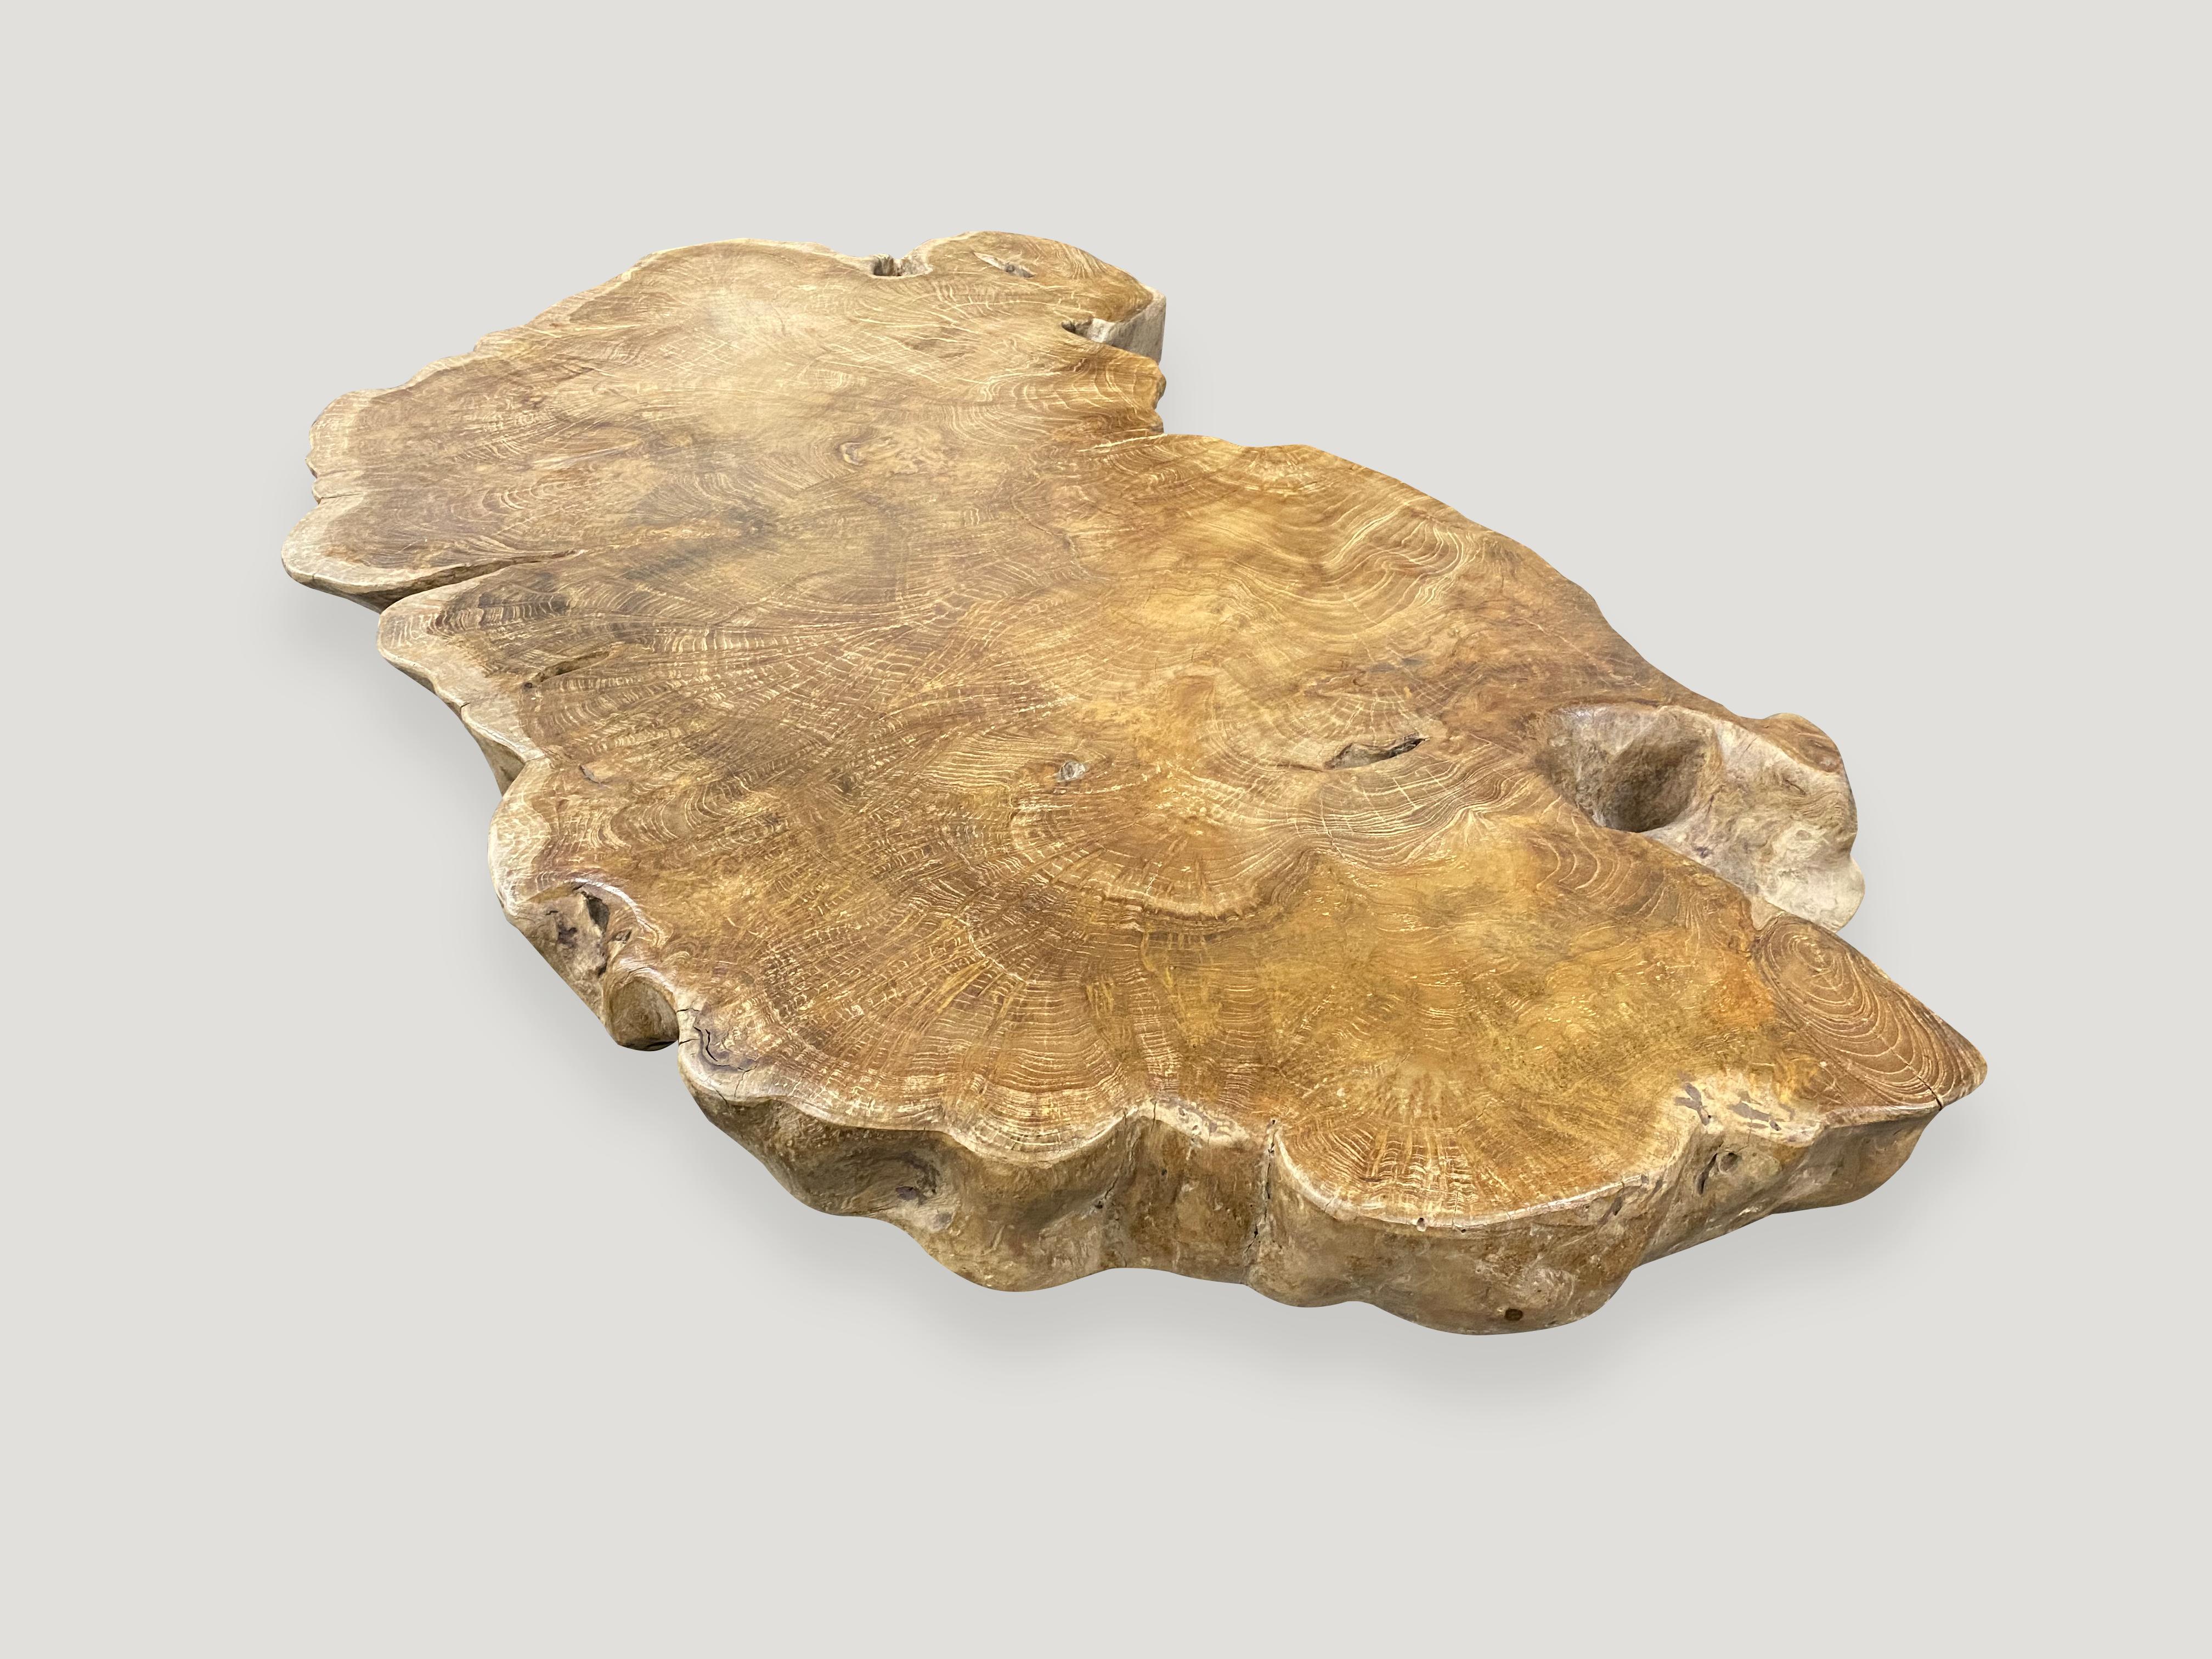 Impressive four inch thick reclaimed burl wood teak coffee table from the root of a tree. A blend of organic and midcentury. We polished the wood to enhance the beautiful grain with a natural oil finish. Floating on midcentury style legs.

Own an